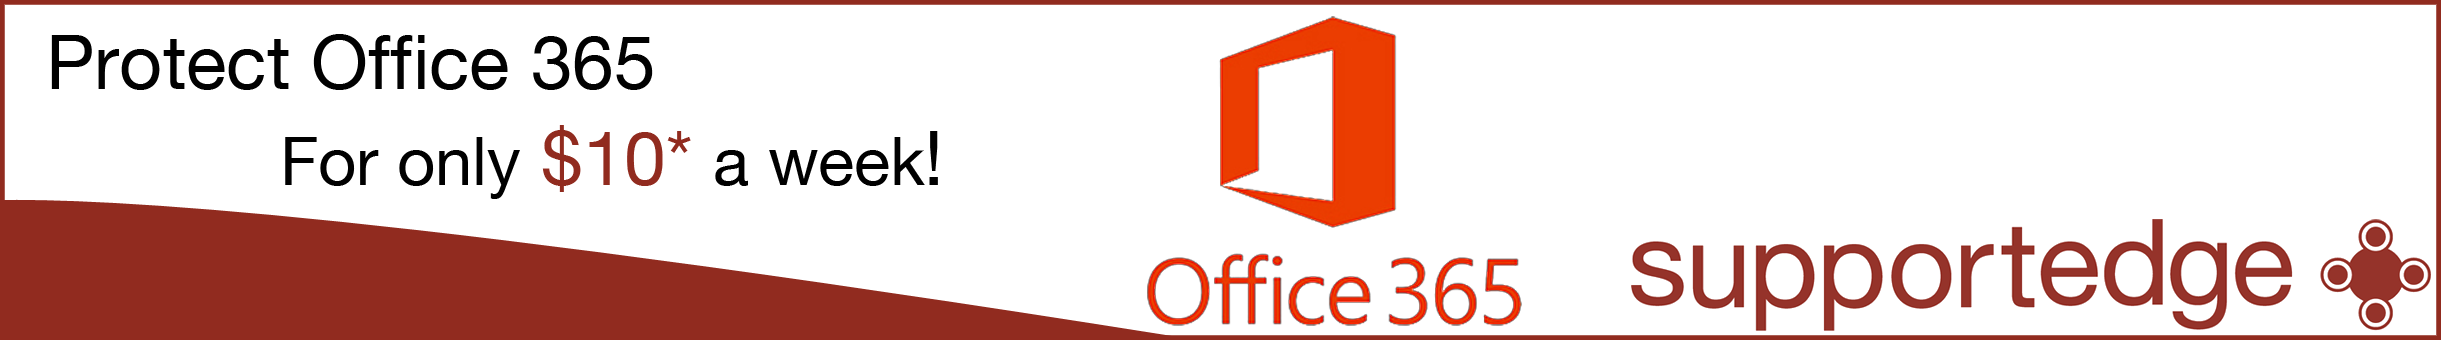 Office365 Office Managed Service Agreement Banner